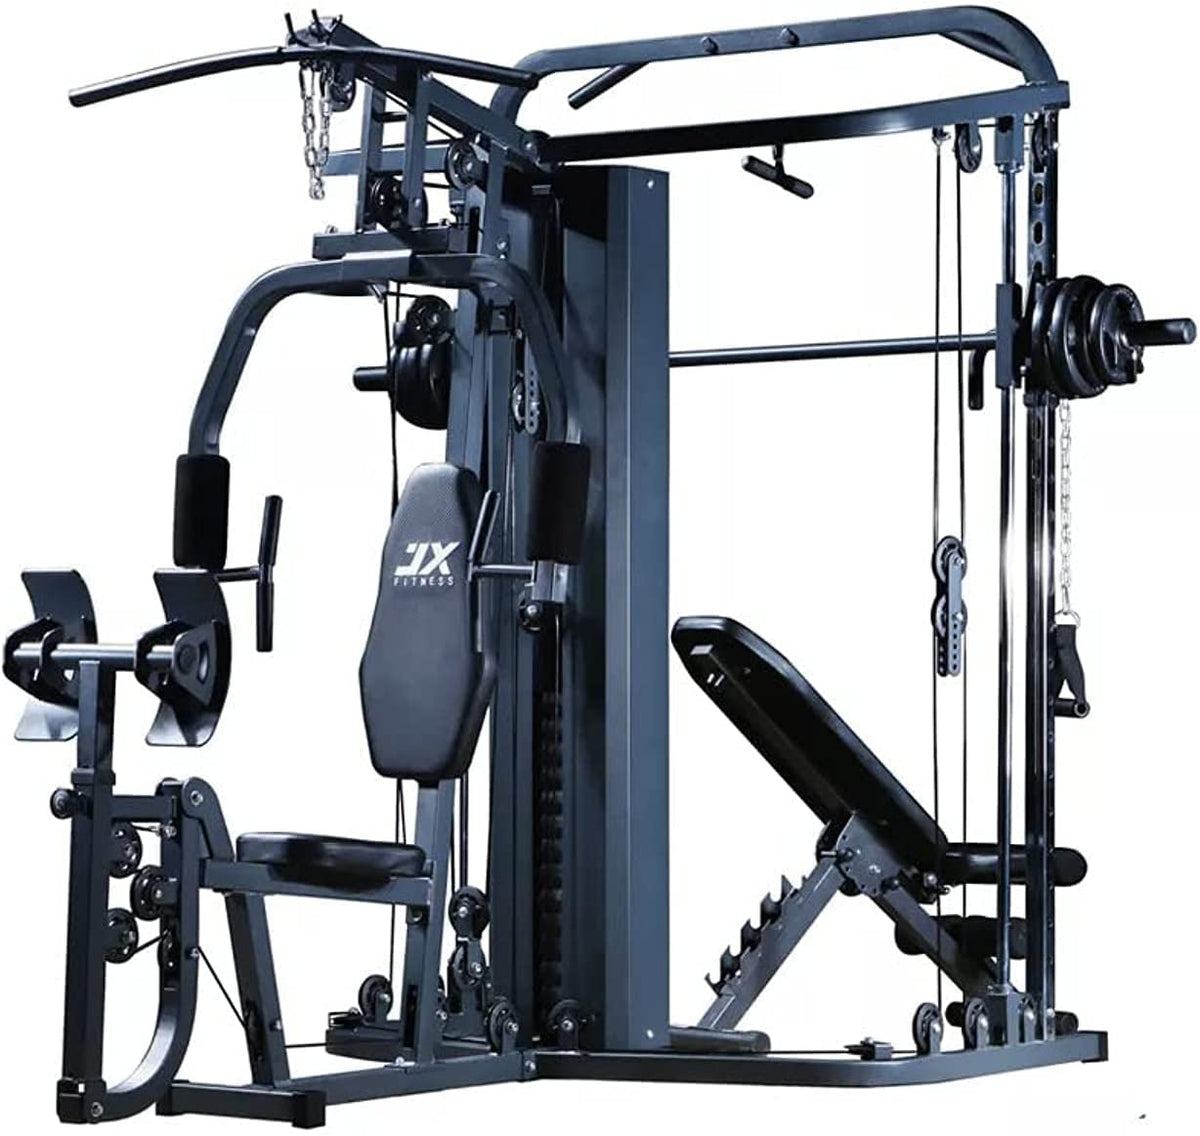 JX Fitness Multi Gym with Smith Machine JX925 138LBS (63KG) Stack Weights without Bench